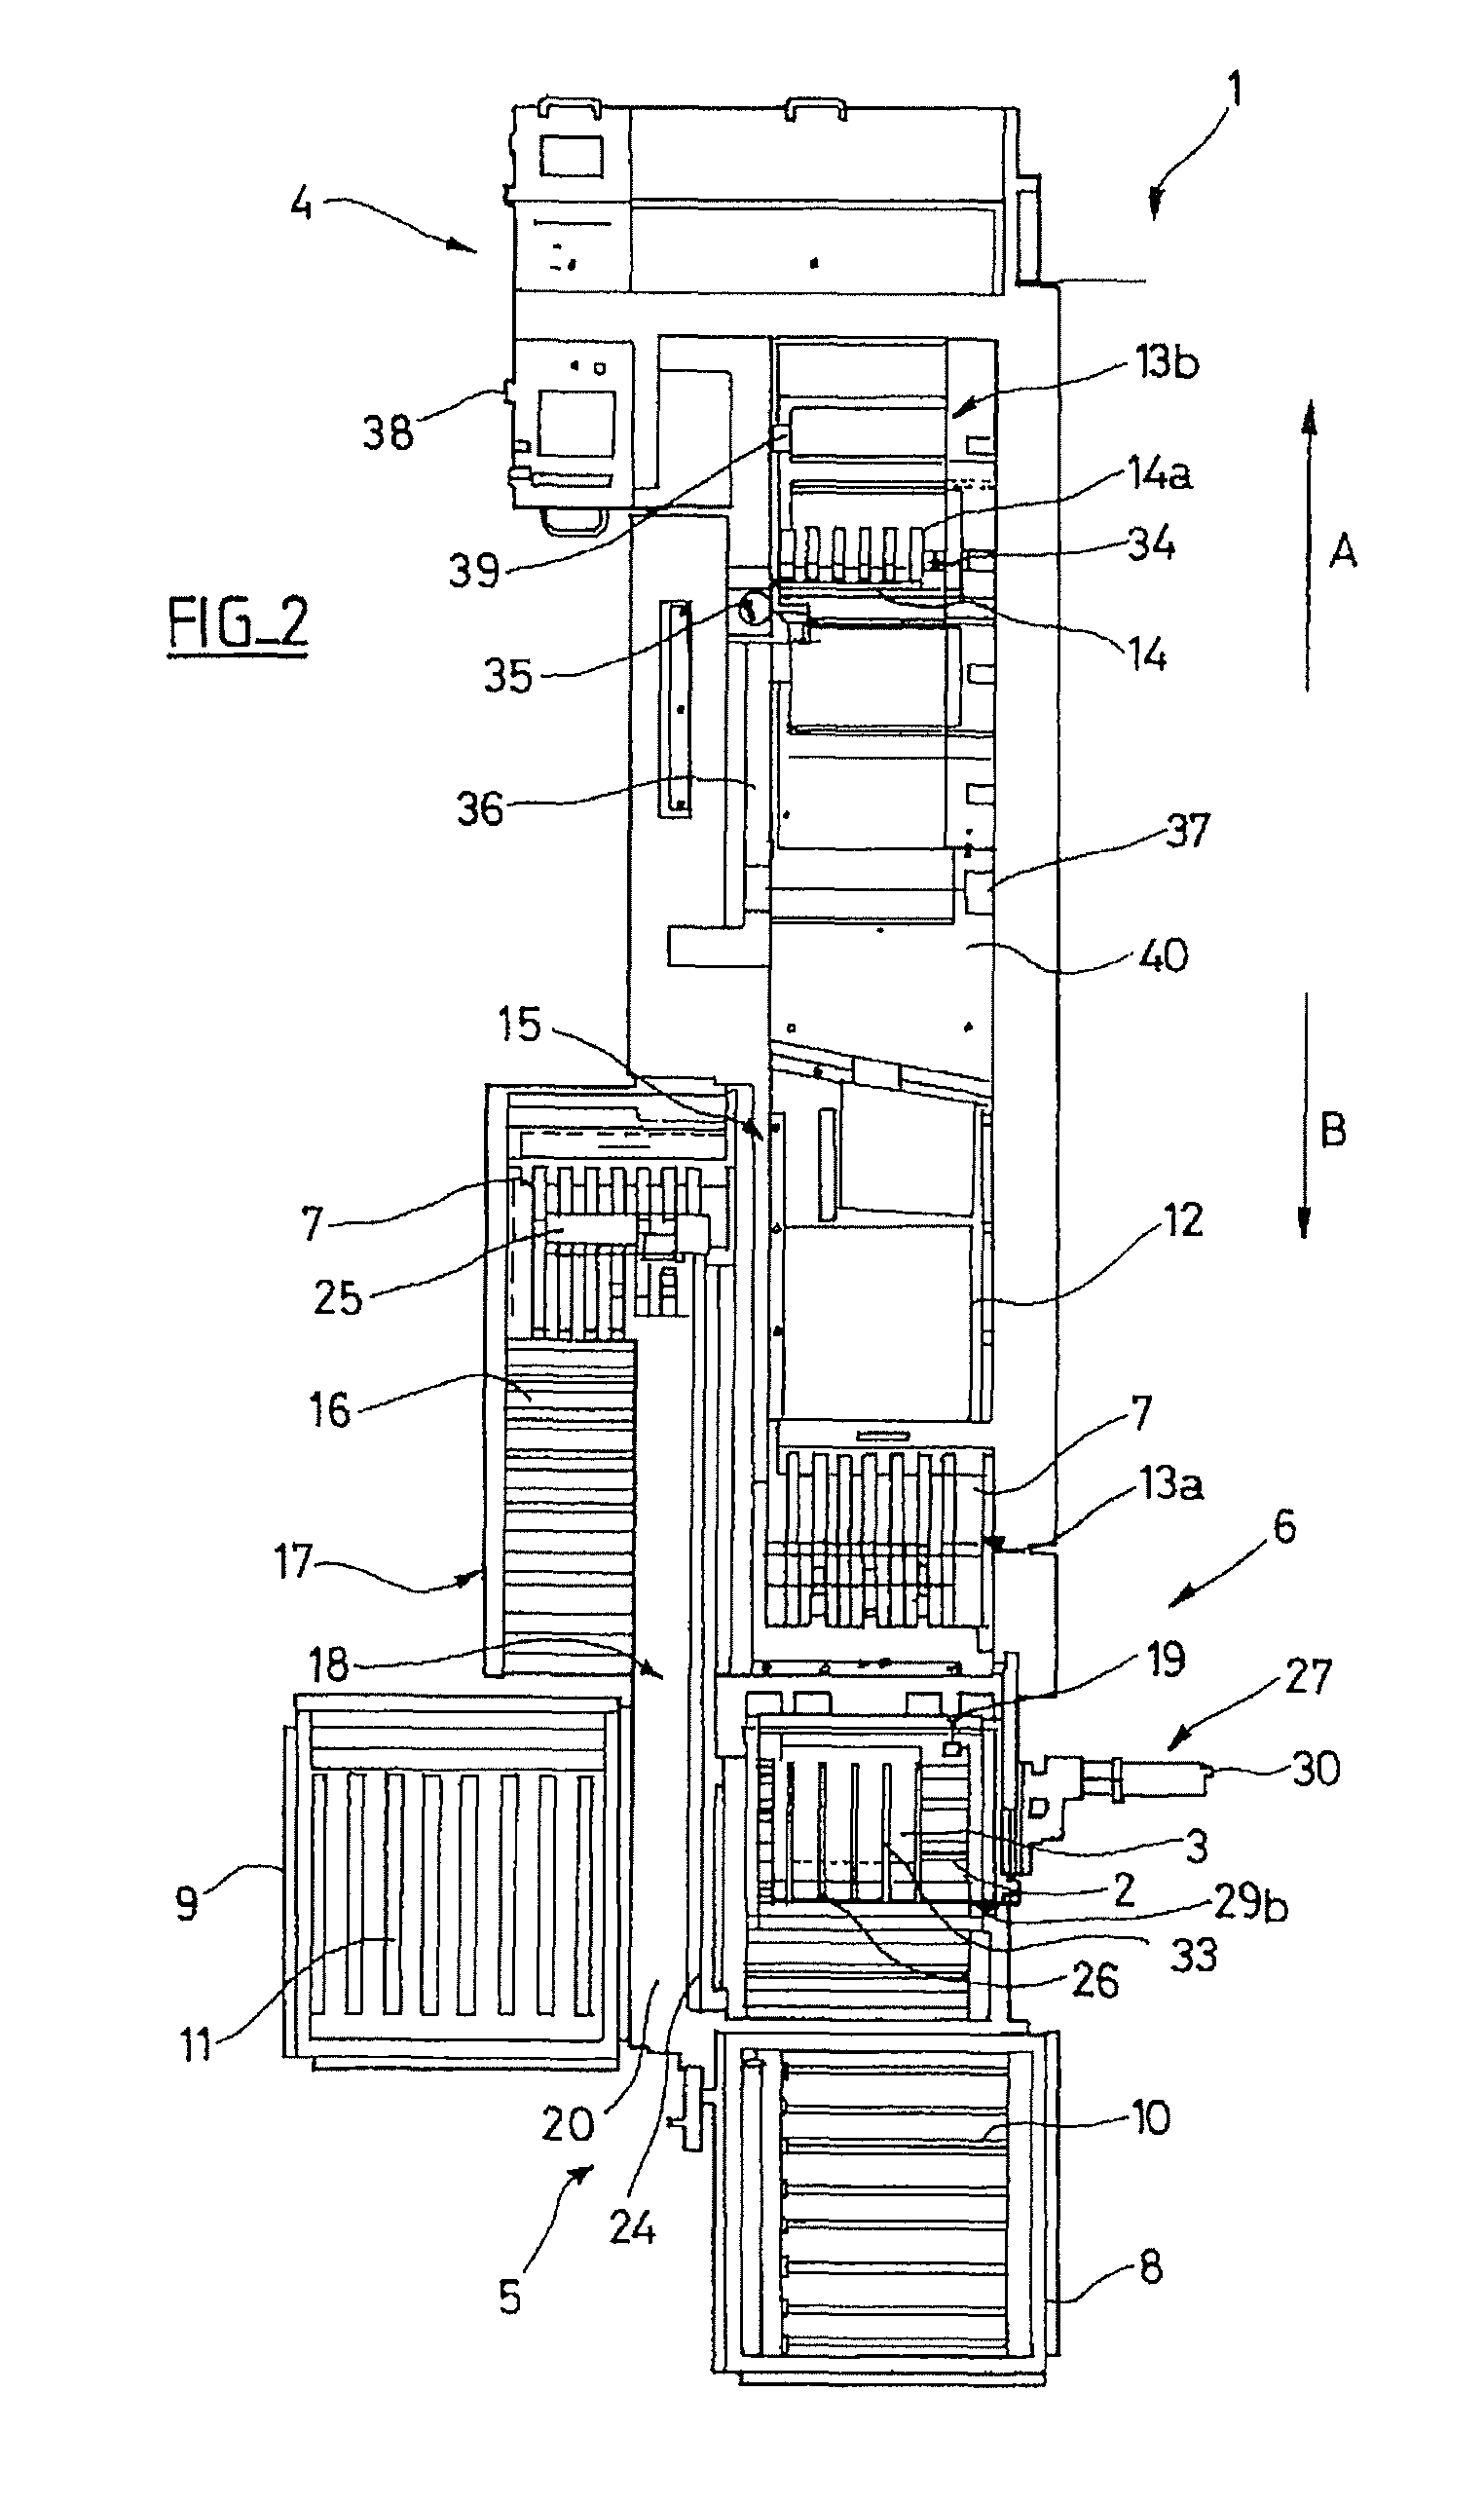 Device for unloading trays using a pivot member